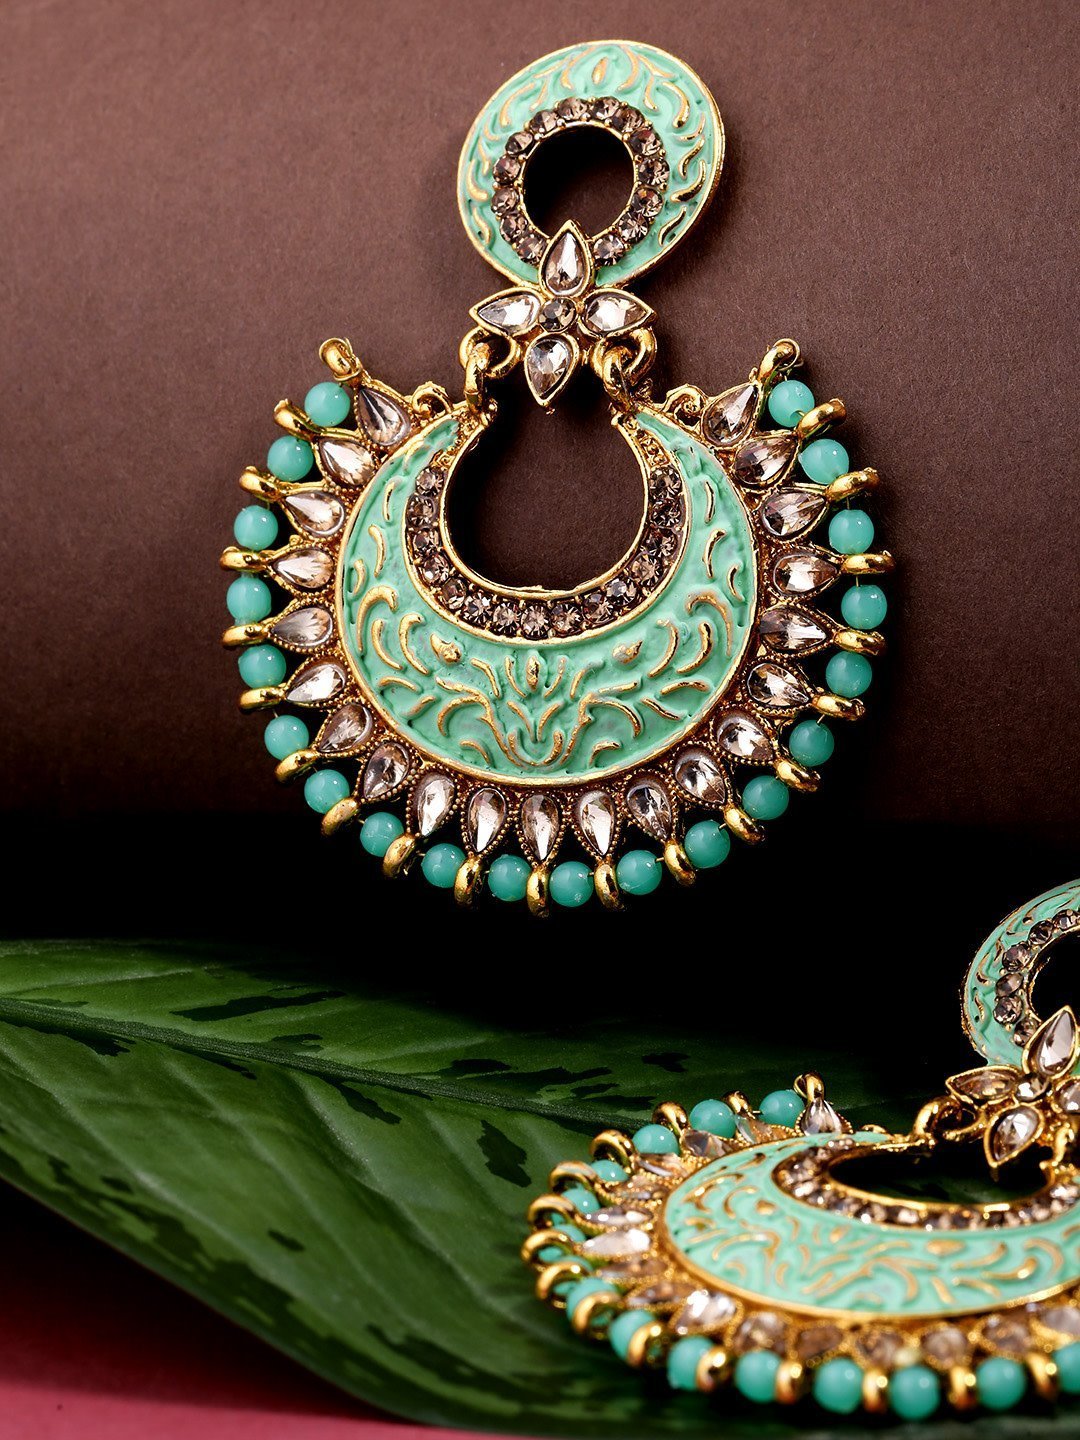 Women's Chand Bali Gold Plated Drop Earrings Sea Green Colour For Women And Girls - Priyaasi